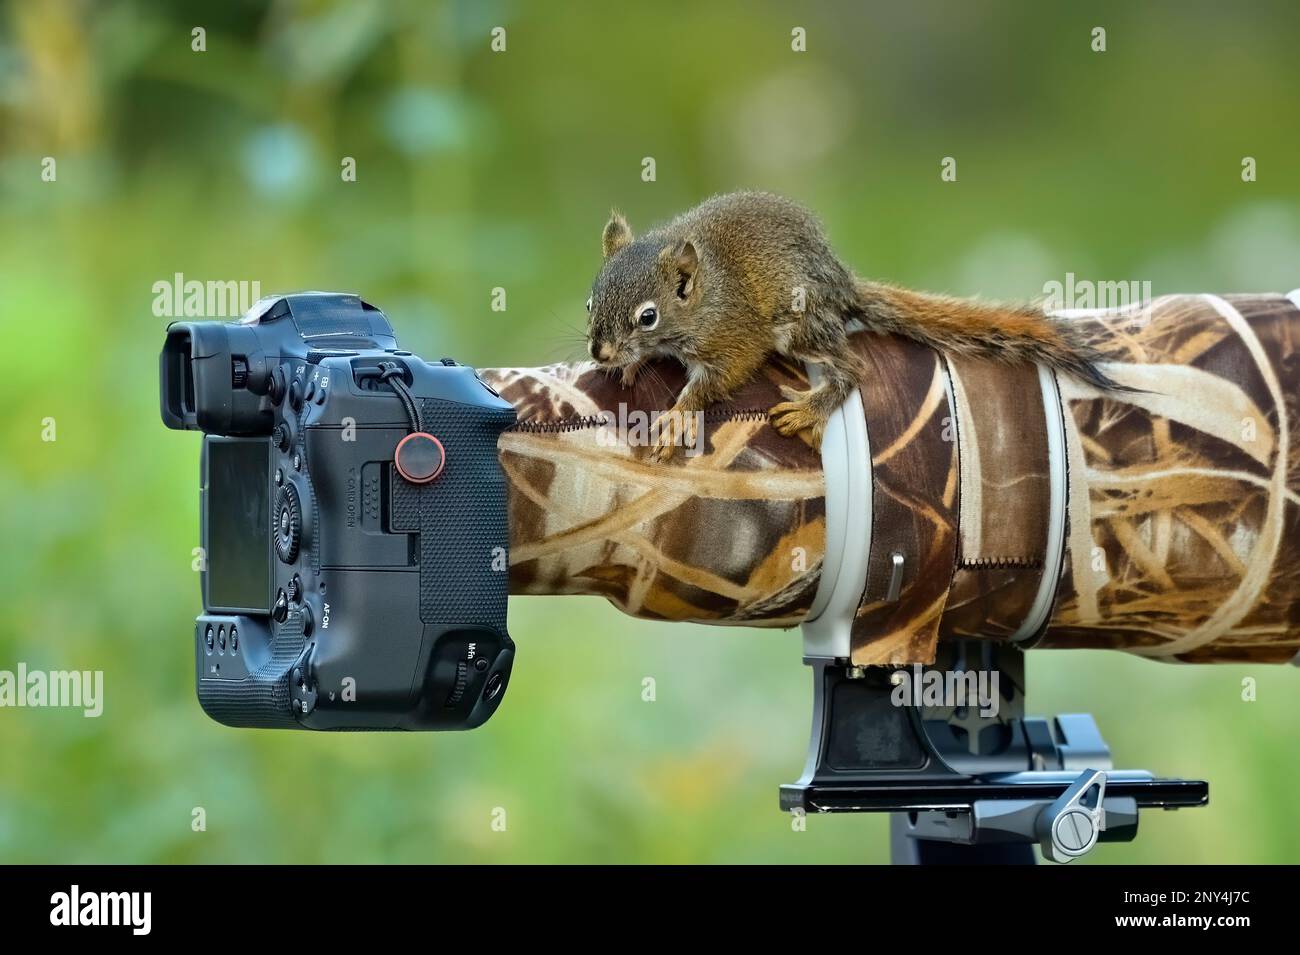 A young red squirrel 'Tamiasciurus hudsonicus', climbing on a photographer's camera lens on a wildlife shoot in rural Alberta Canada Stock Photo